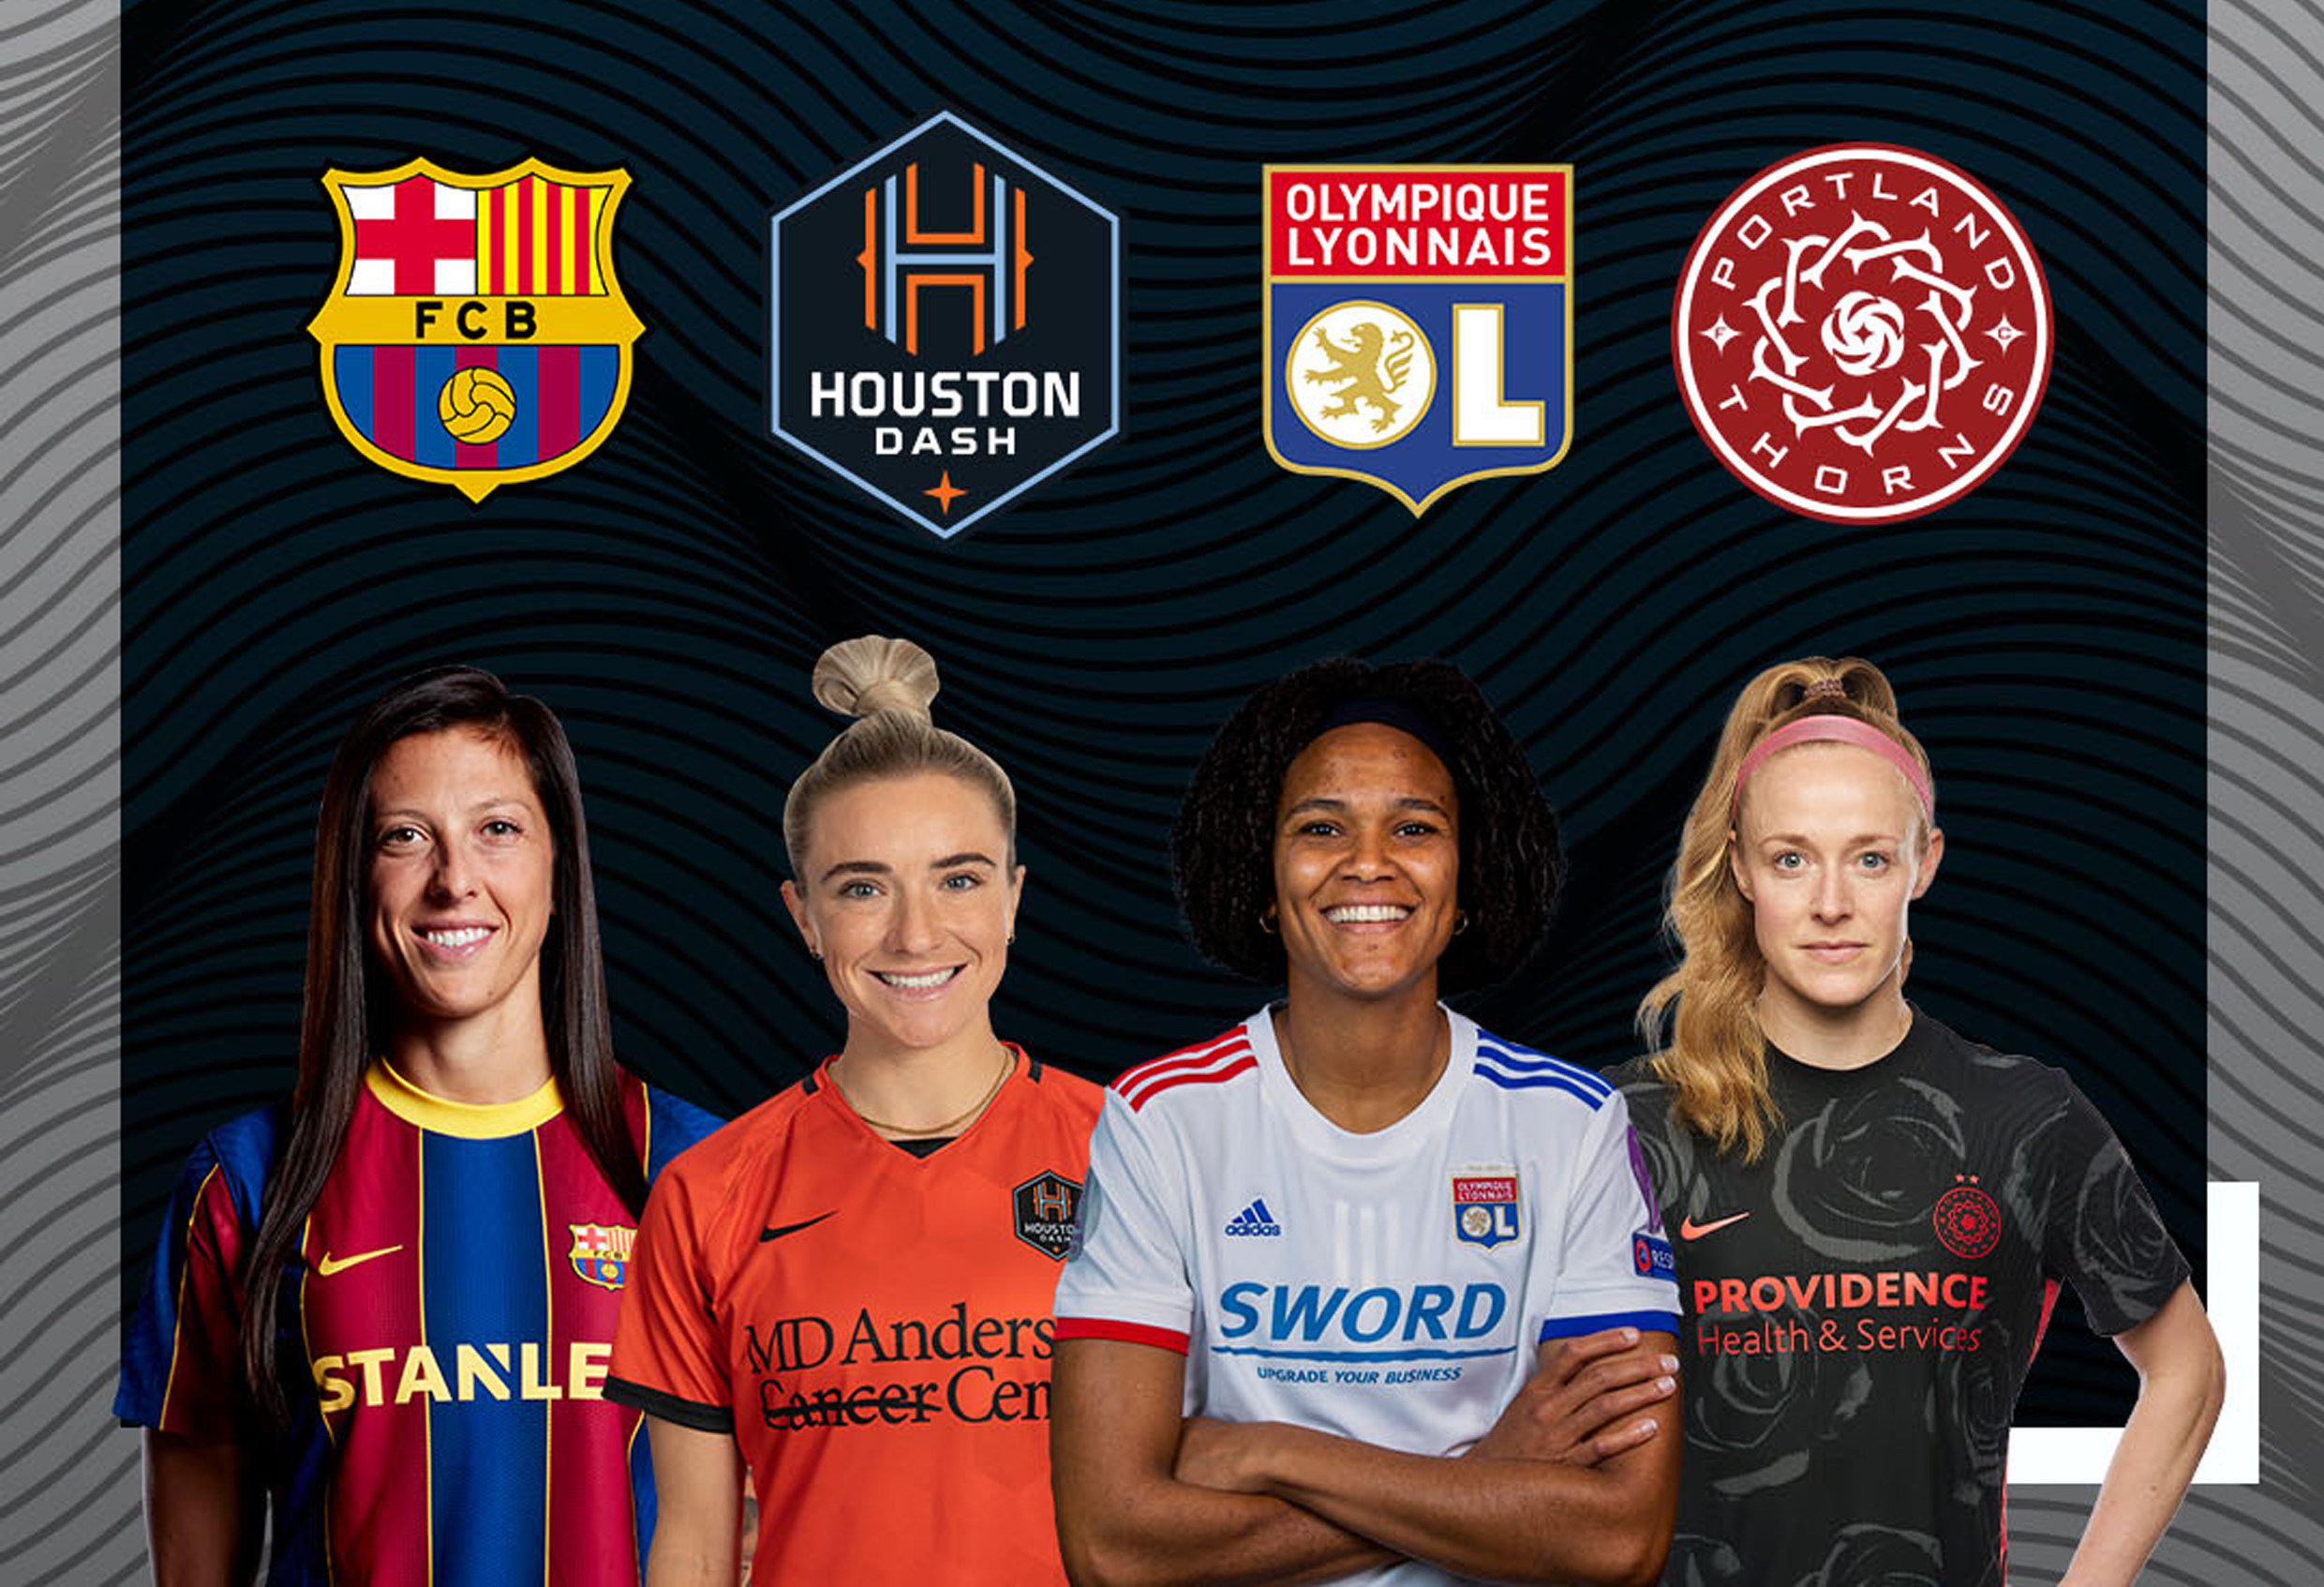 DAZN Secures Exclusive Rights to 2021 Women's Cup in 120+ Countries and Territories - PR